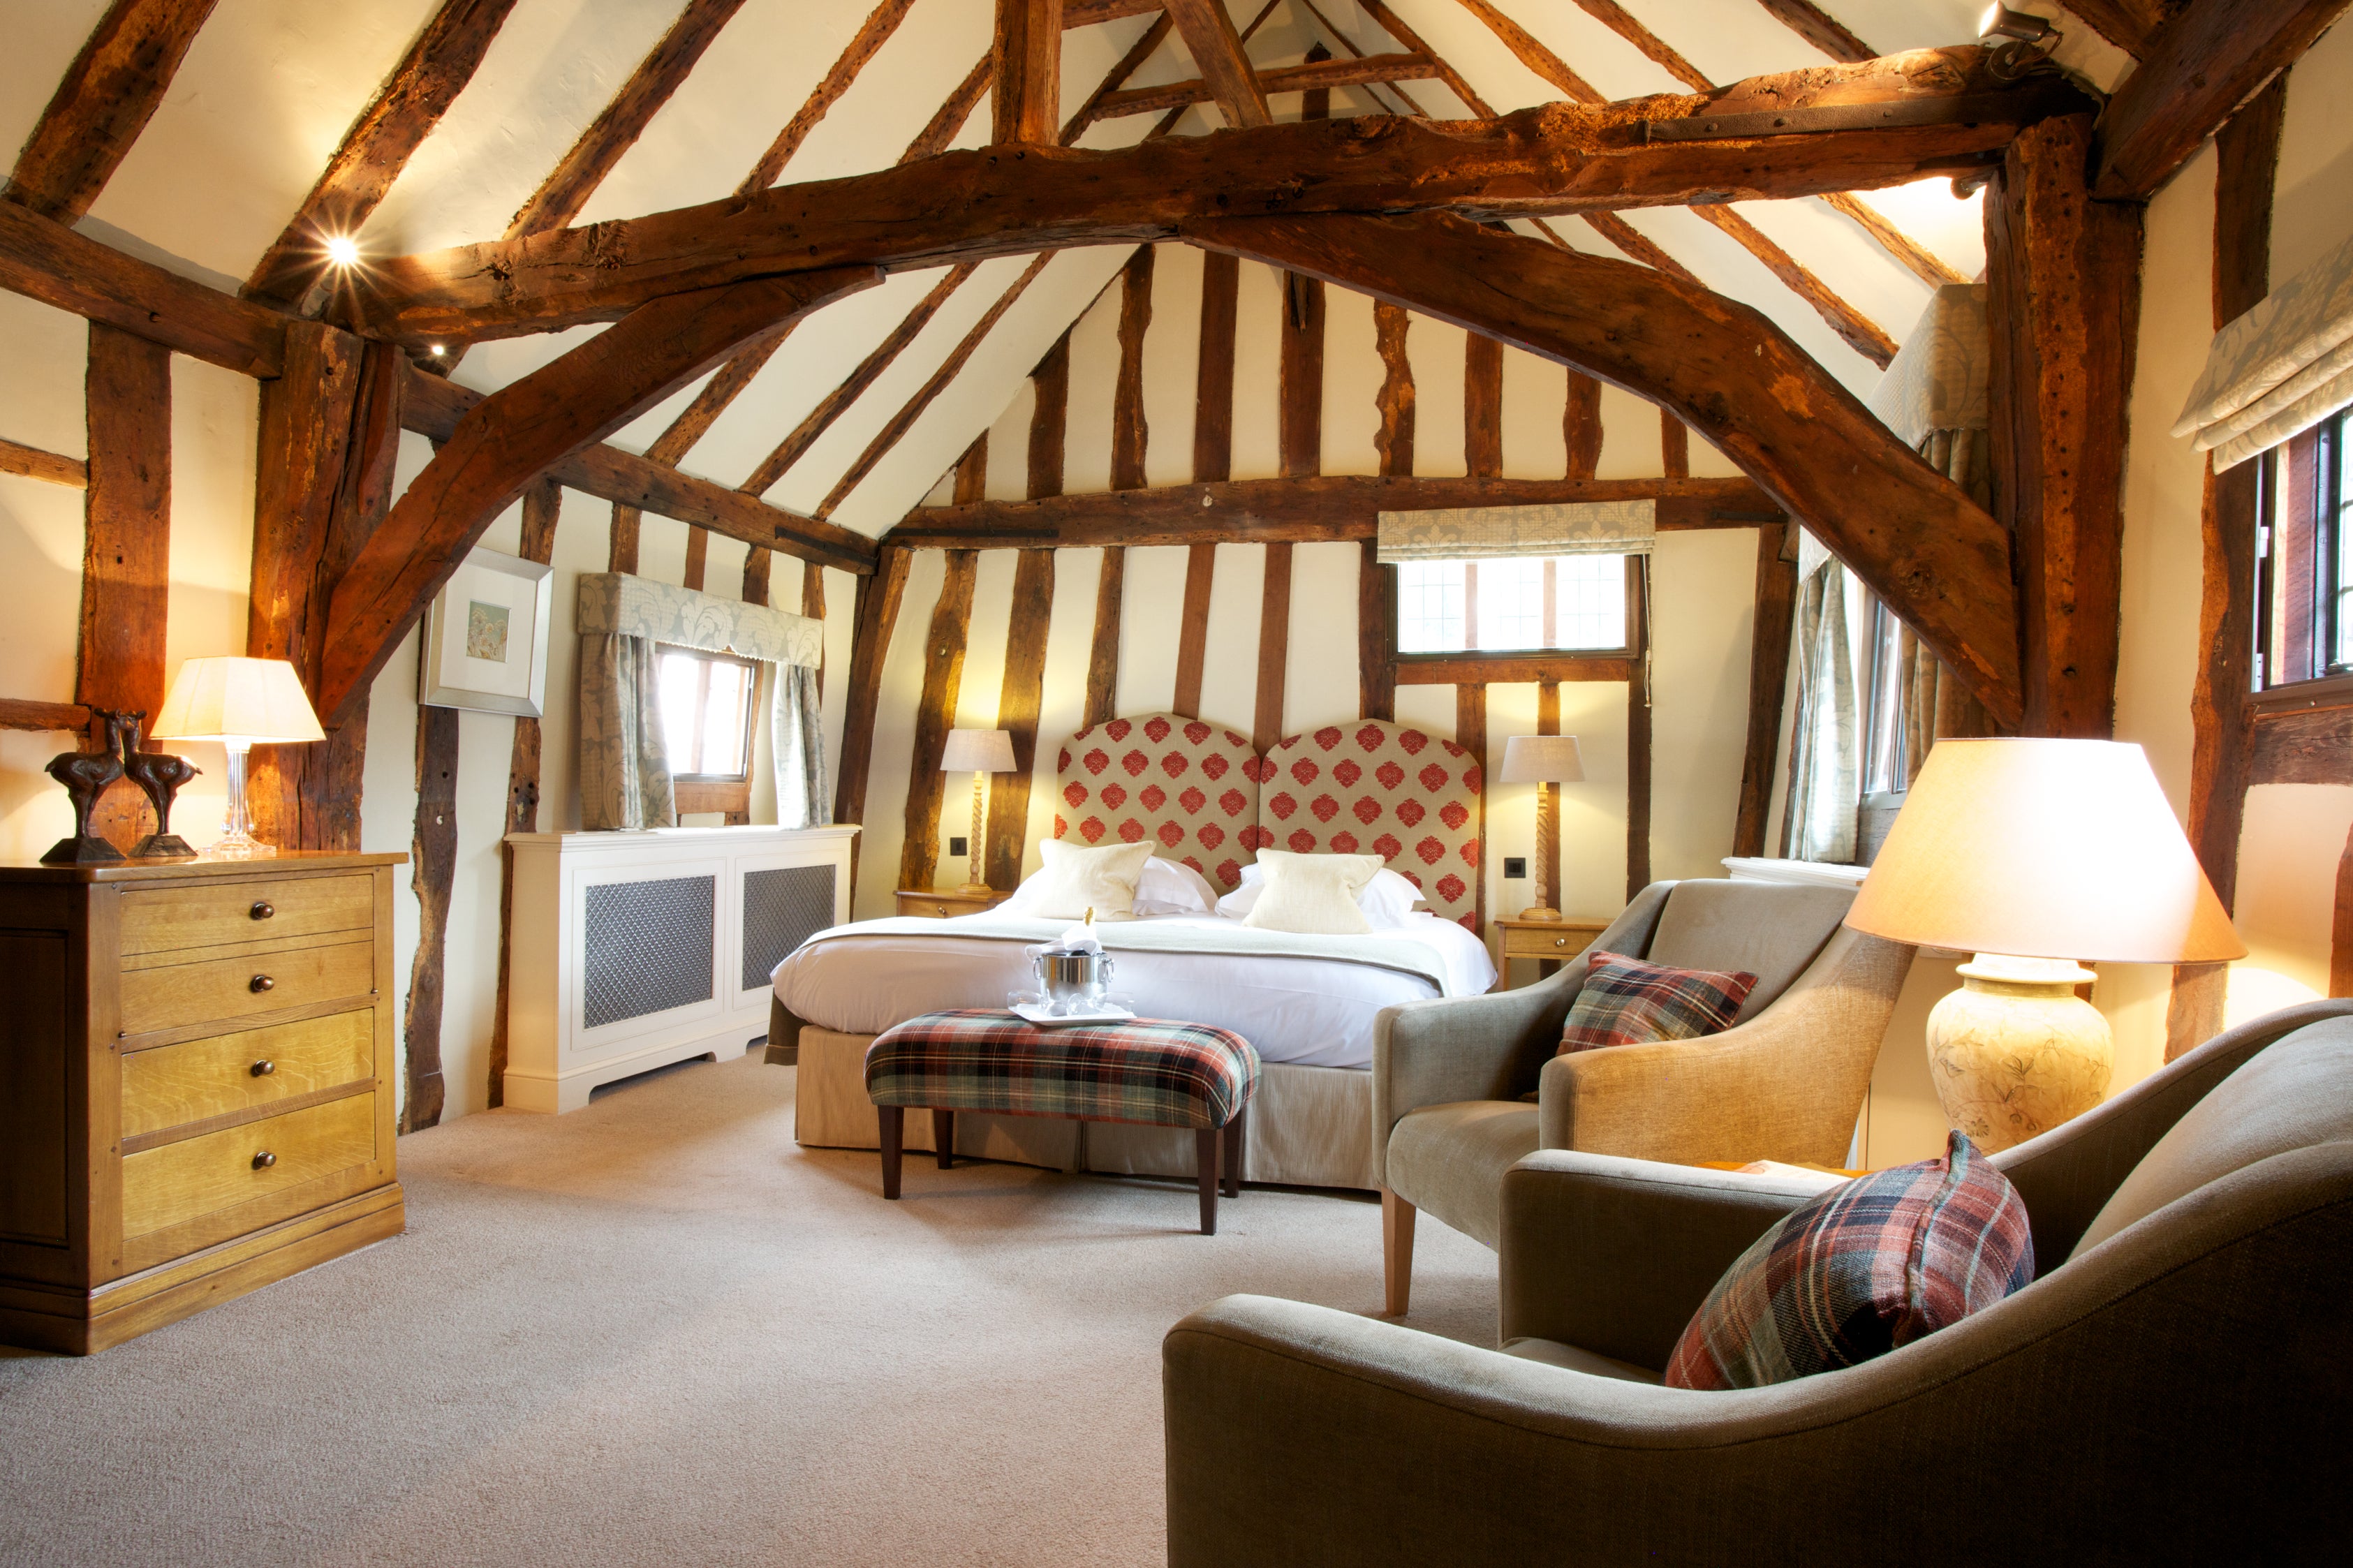 Exposed beams give the Swan a cosy cottage vibe